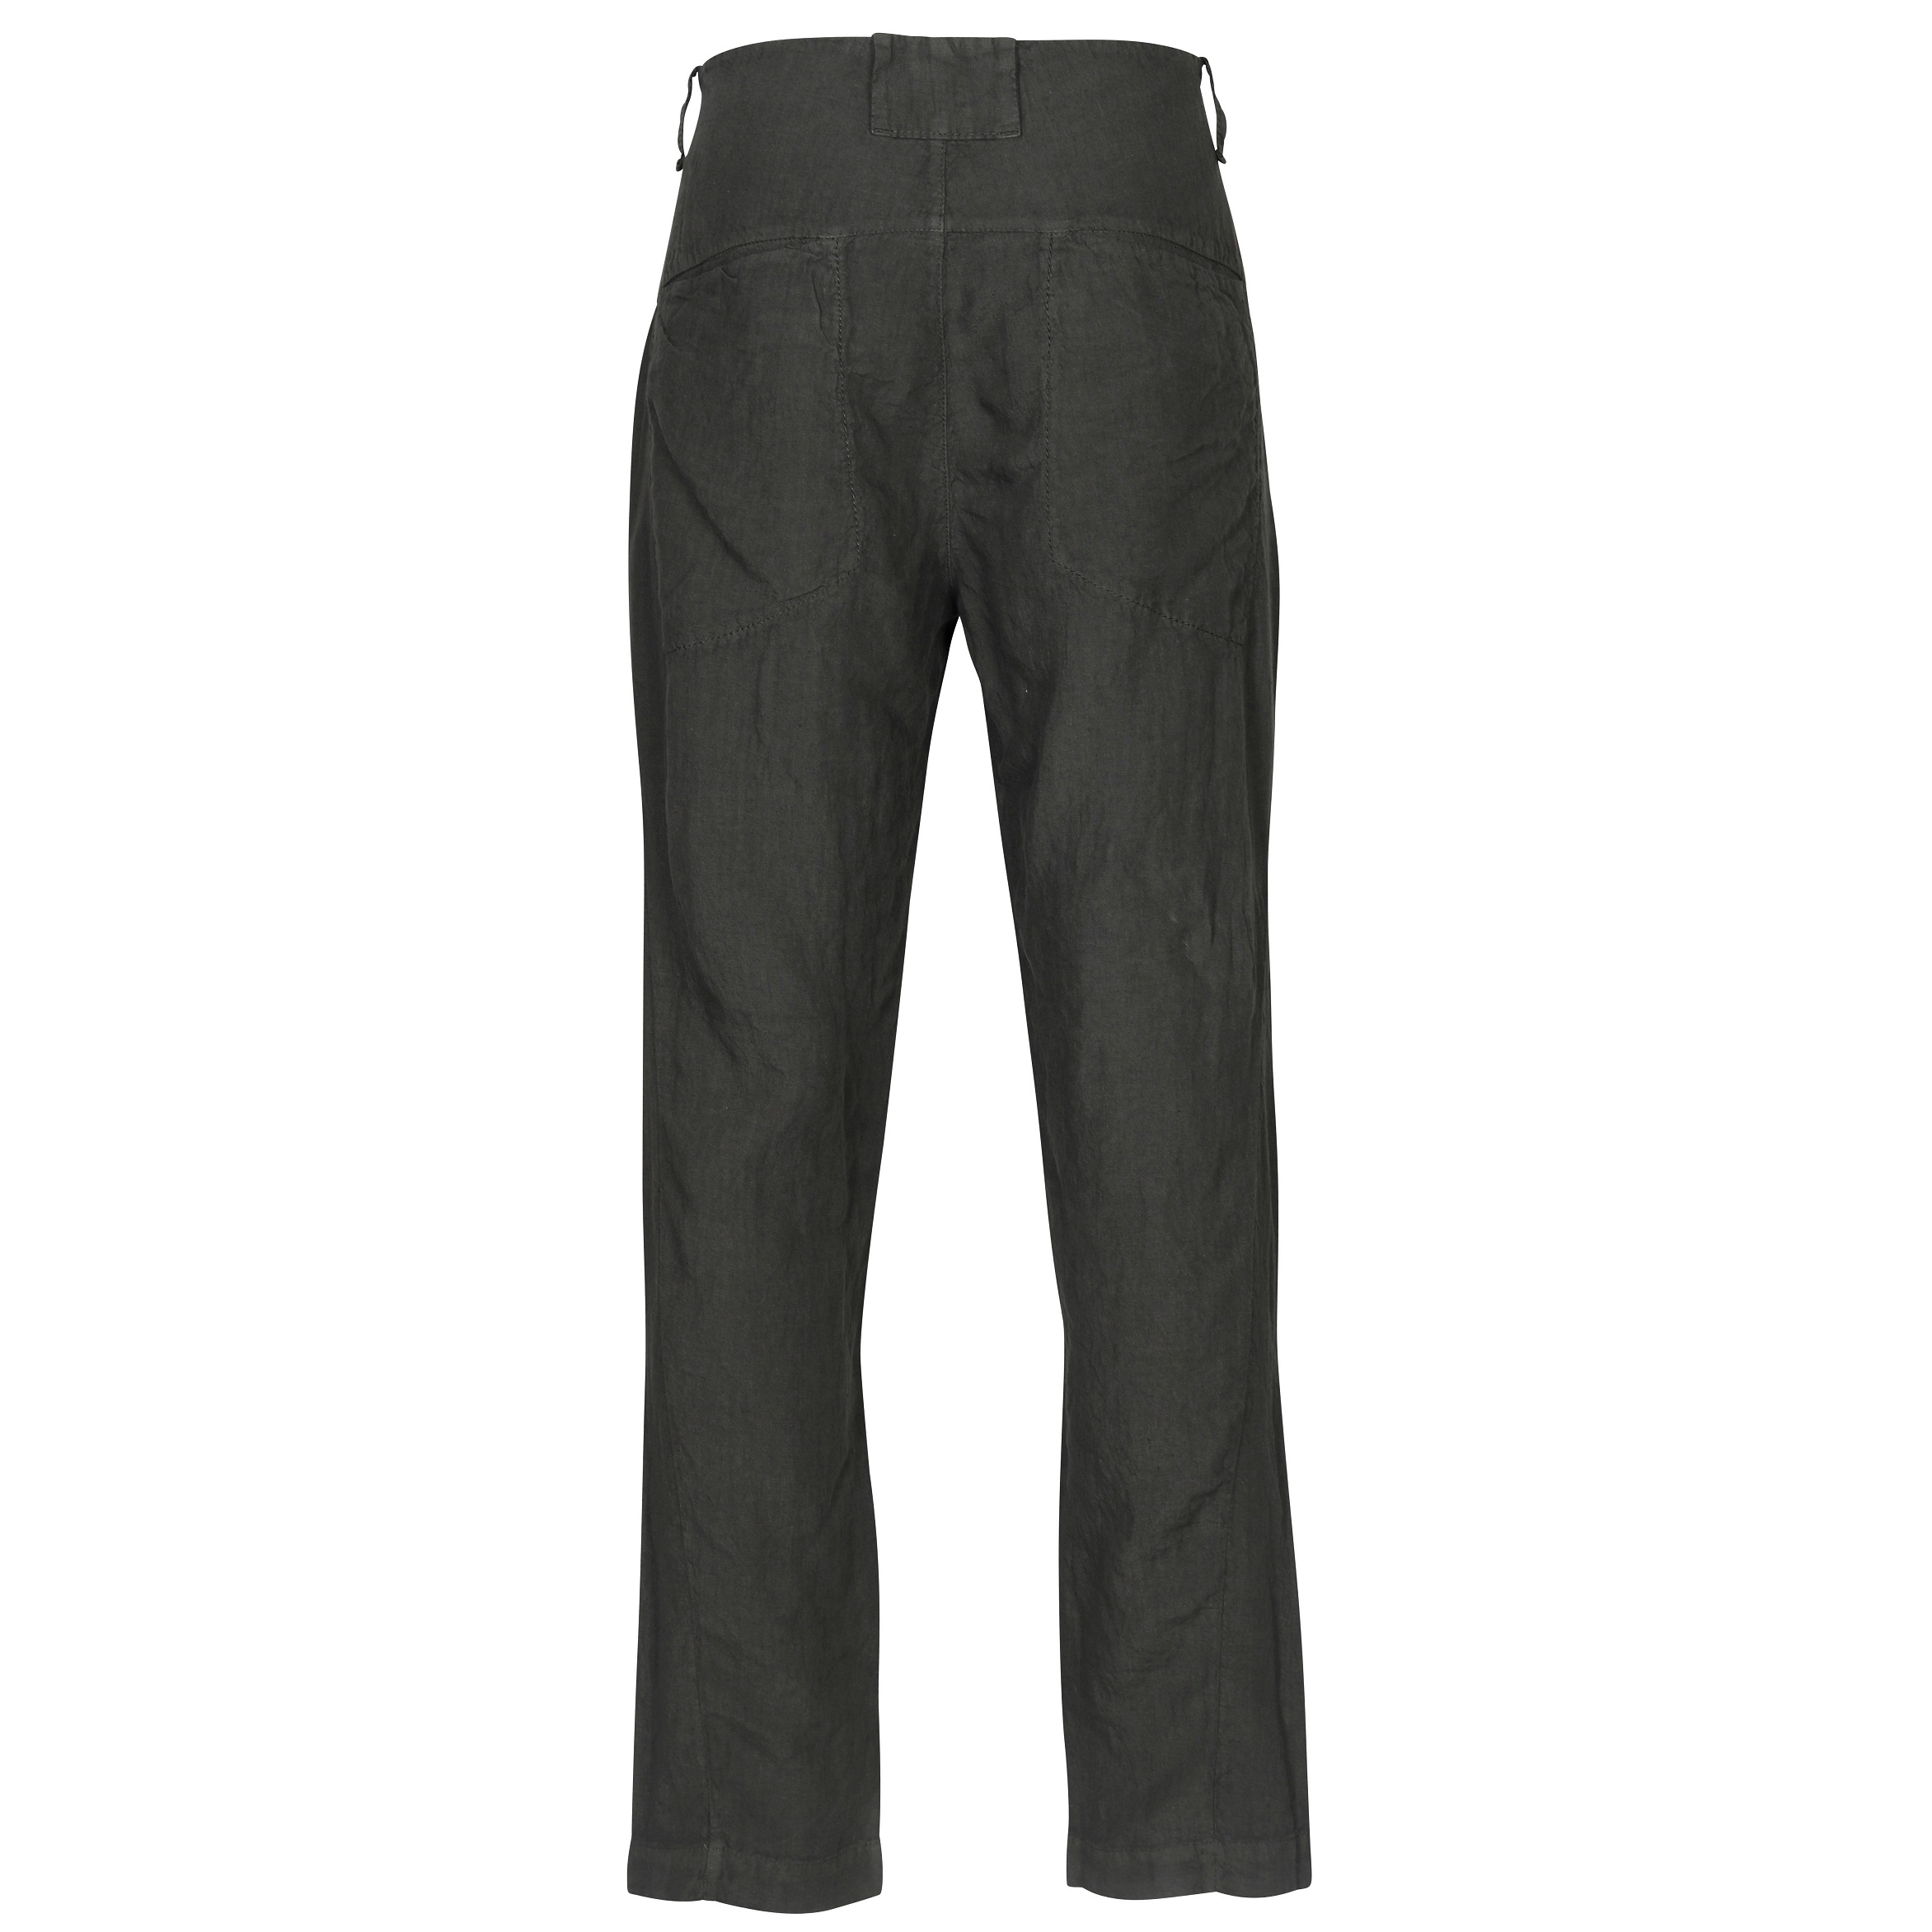 TRANSIT UOMO Linen Pant in Forest